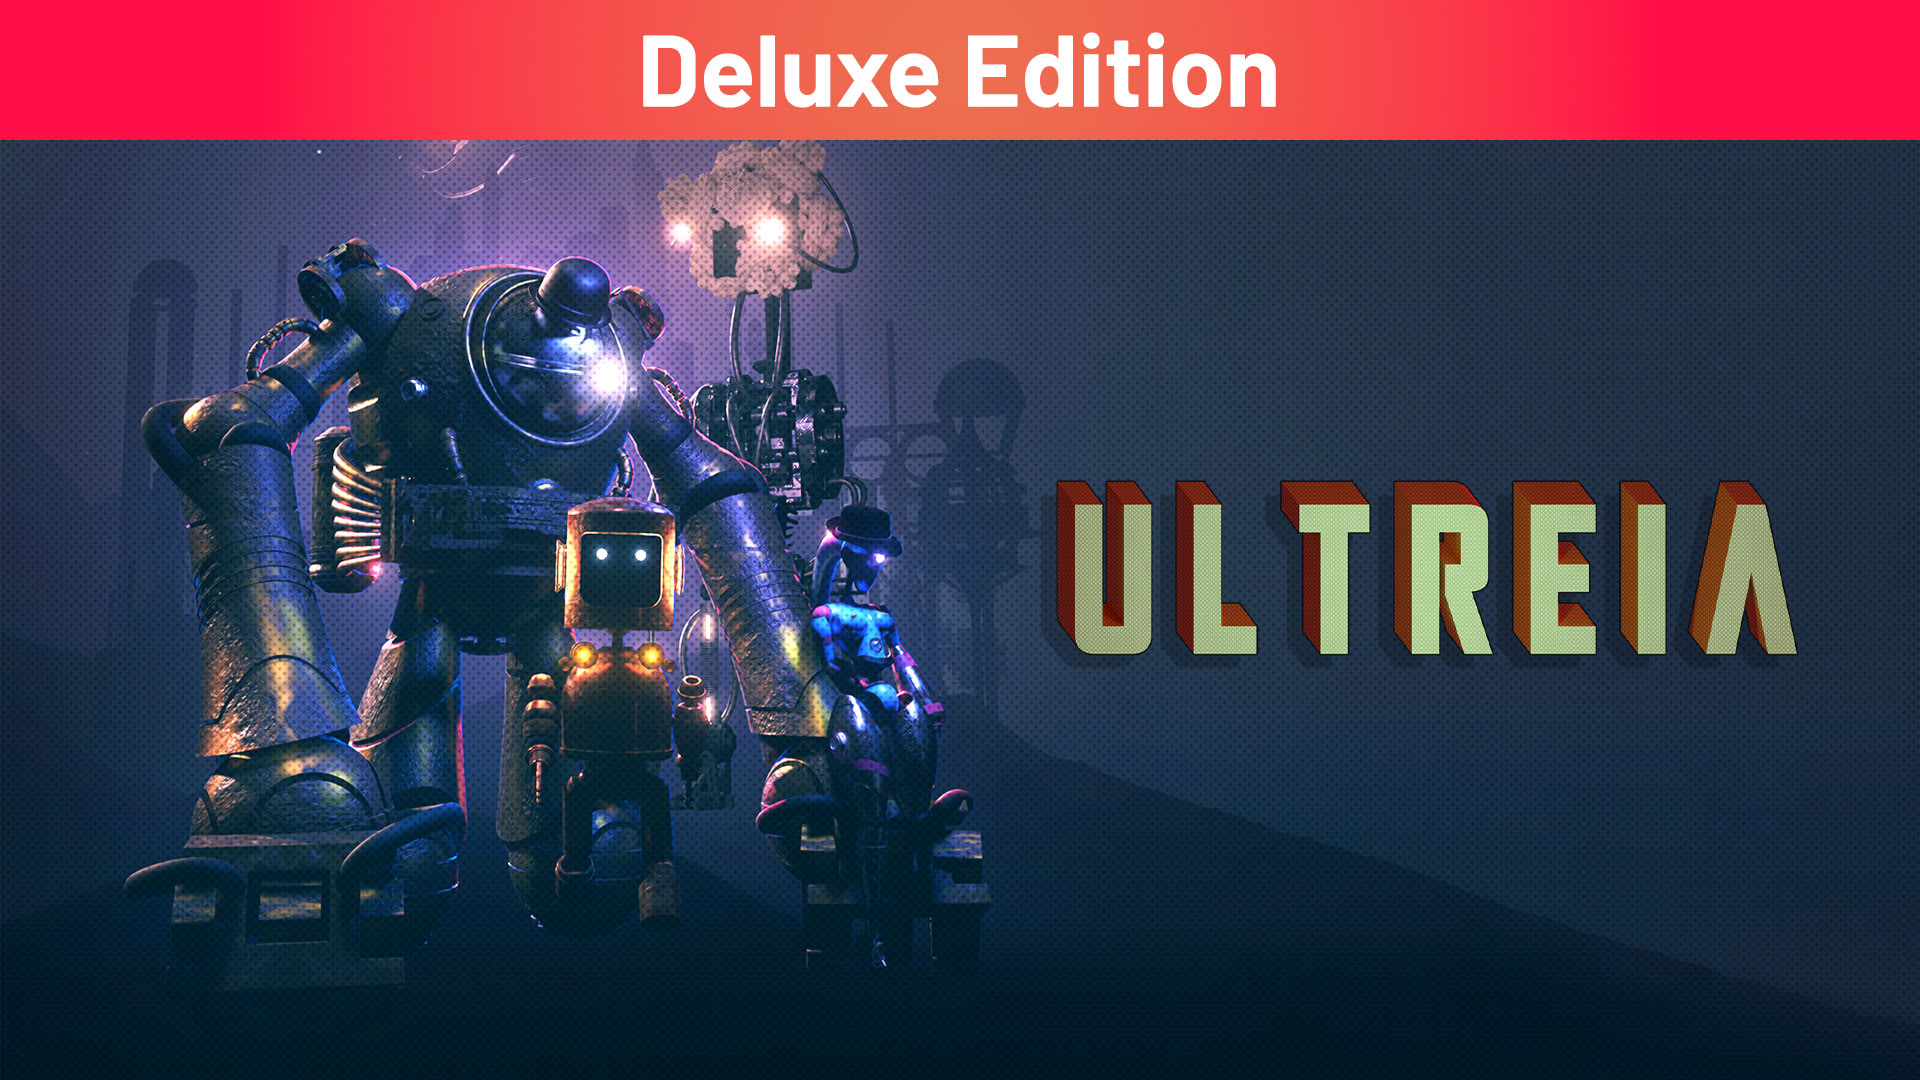 Ultreïa Deluxe Edition